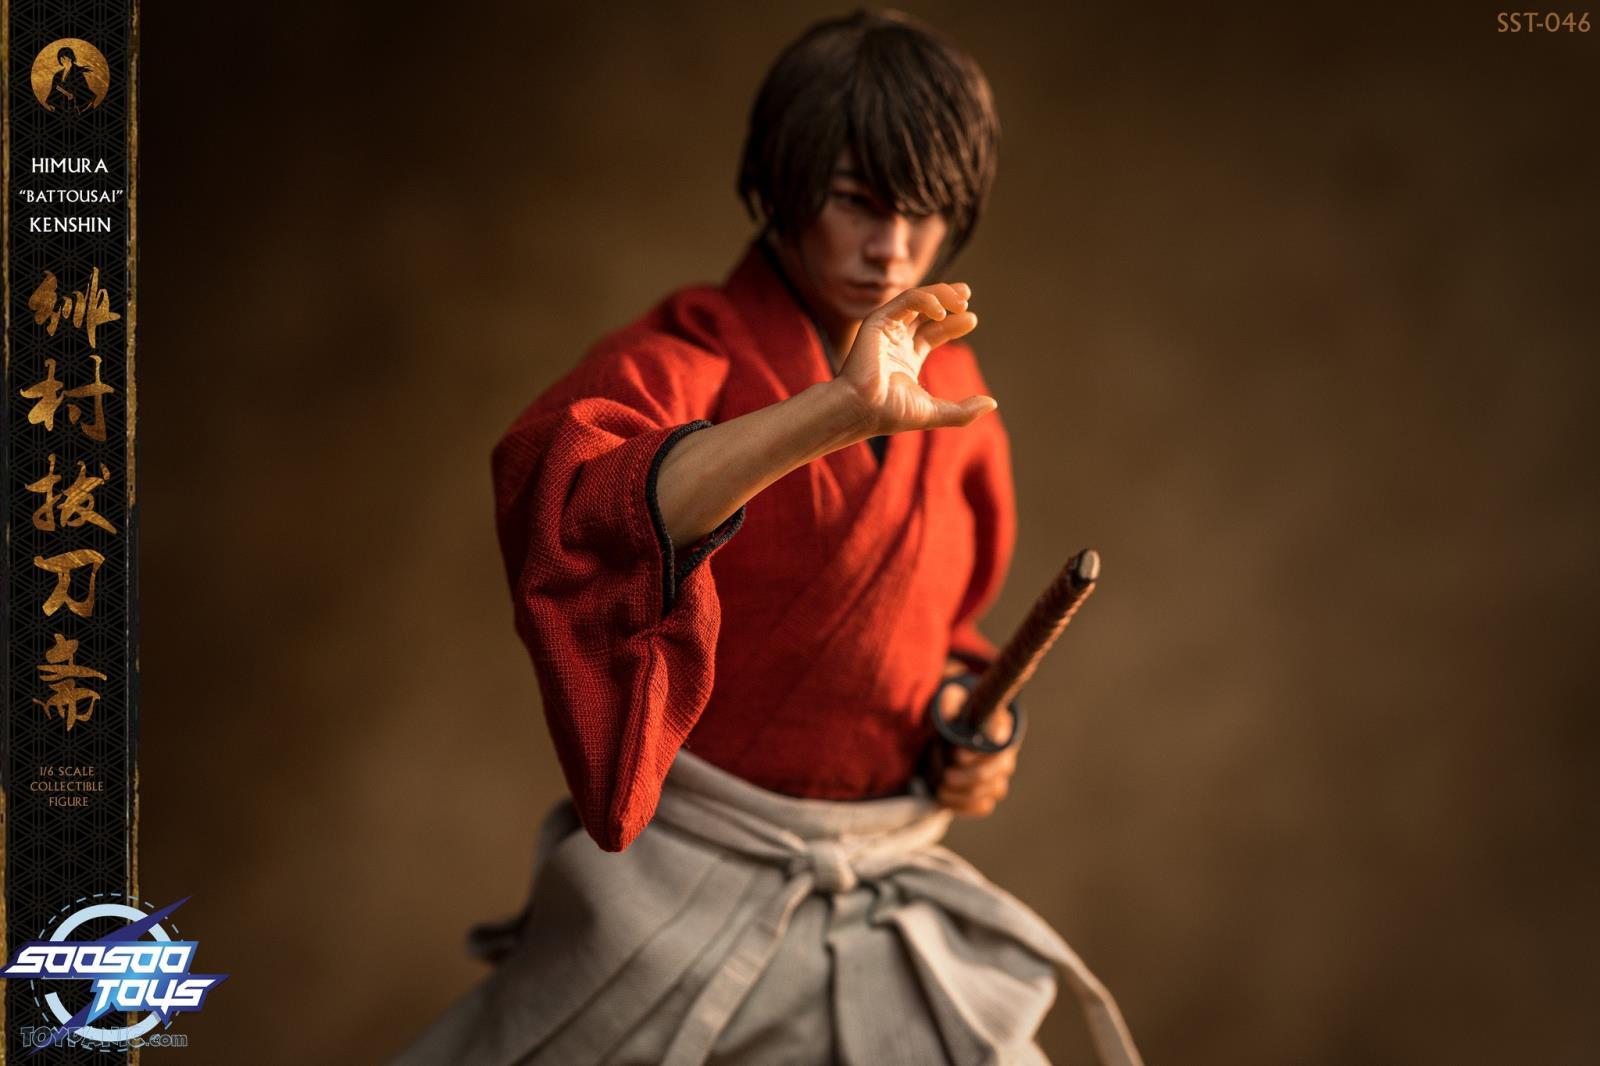 NEW PRODUCT: 1/6 scale Rurouni Kenshin Collectible Figure from SooSooToys 712202251230PM_5762173